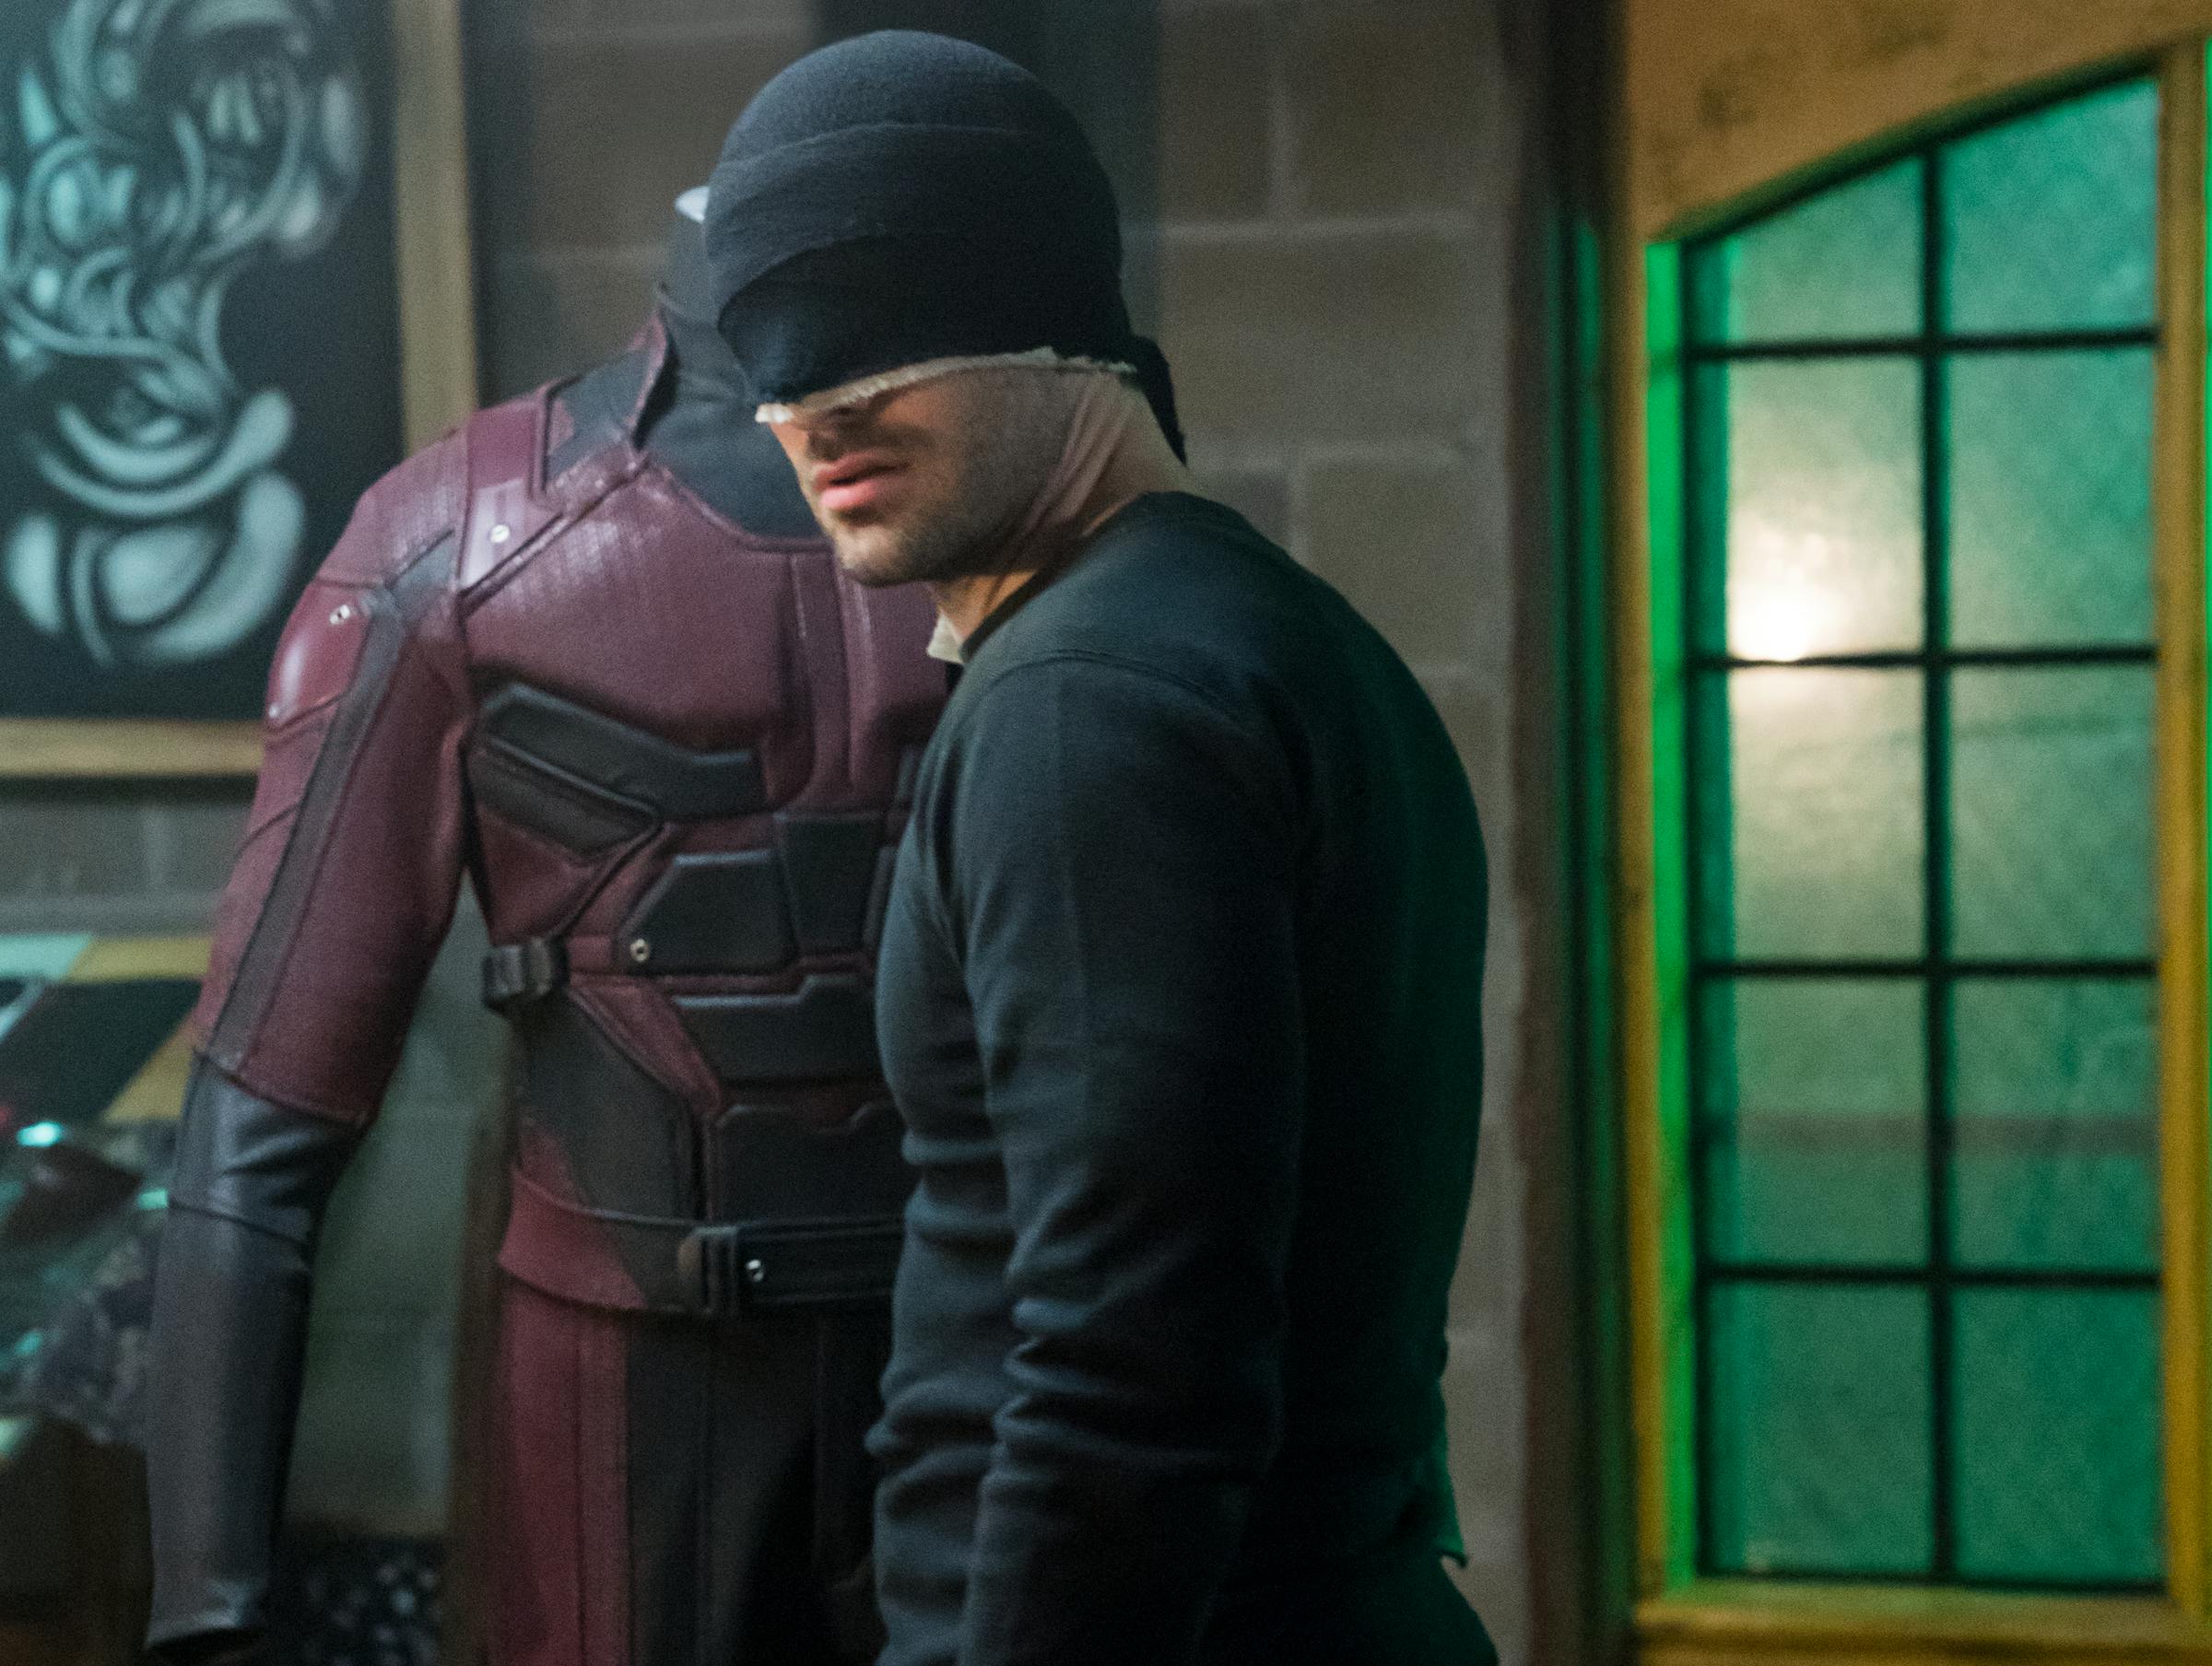 'Daredevil' Season 3 Review: Netflix Leaves the MCU, for the Better | Inverse